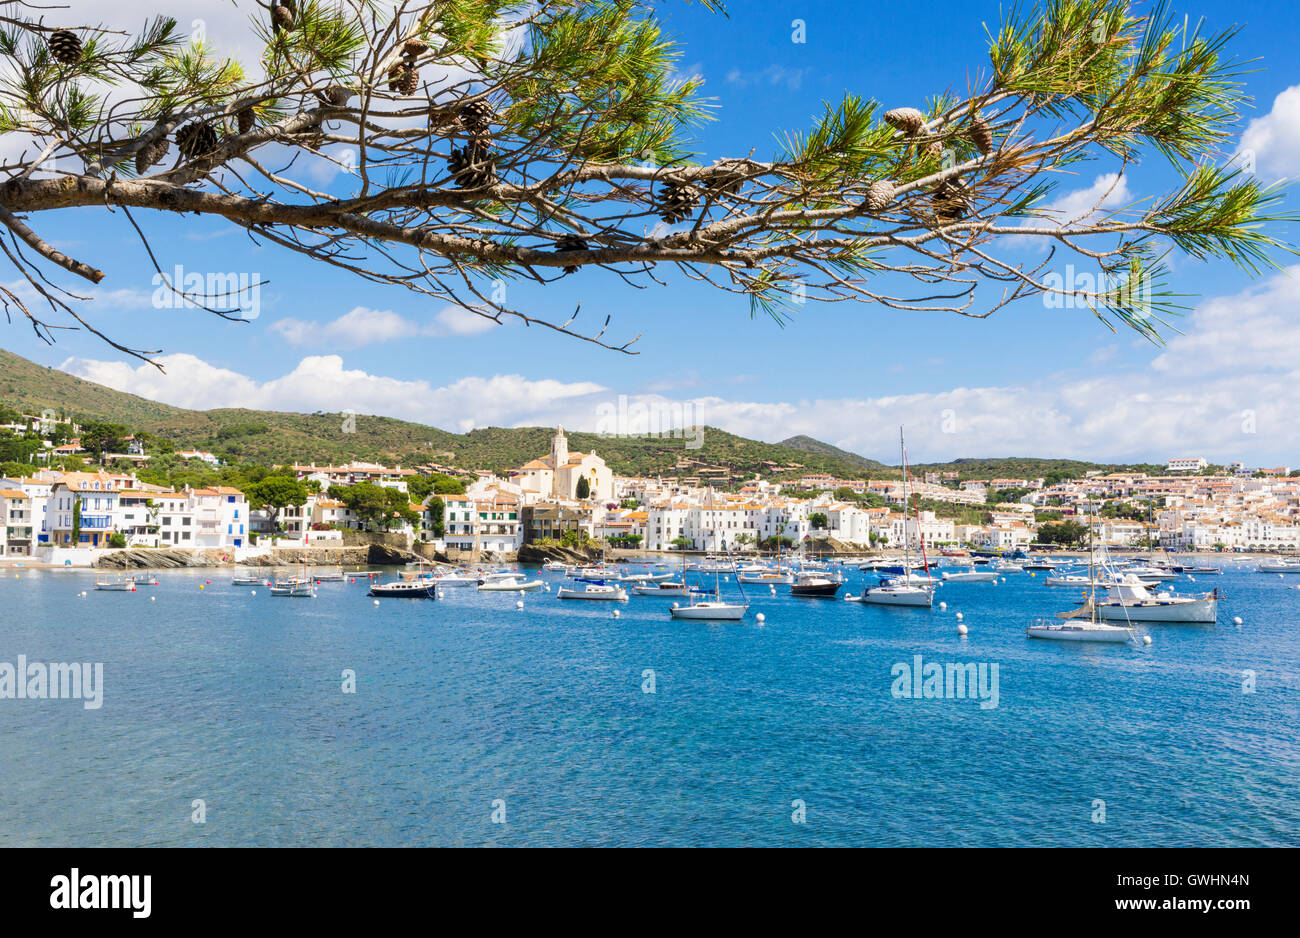 Whitewashed village of Cadaques topped by the Church of Santa Maria overlooking boats in the blue waters of Cadaques Bay, Spain Stock Photo